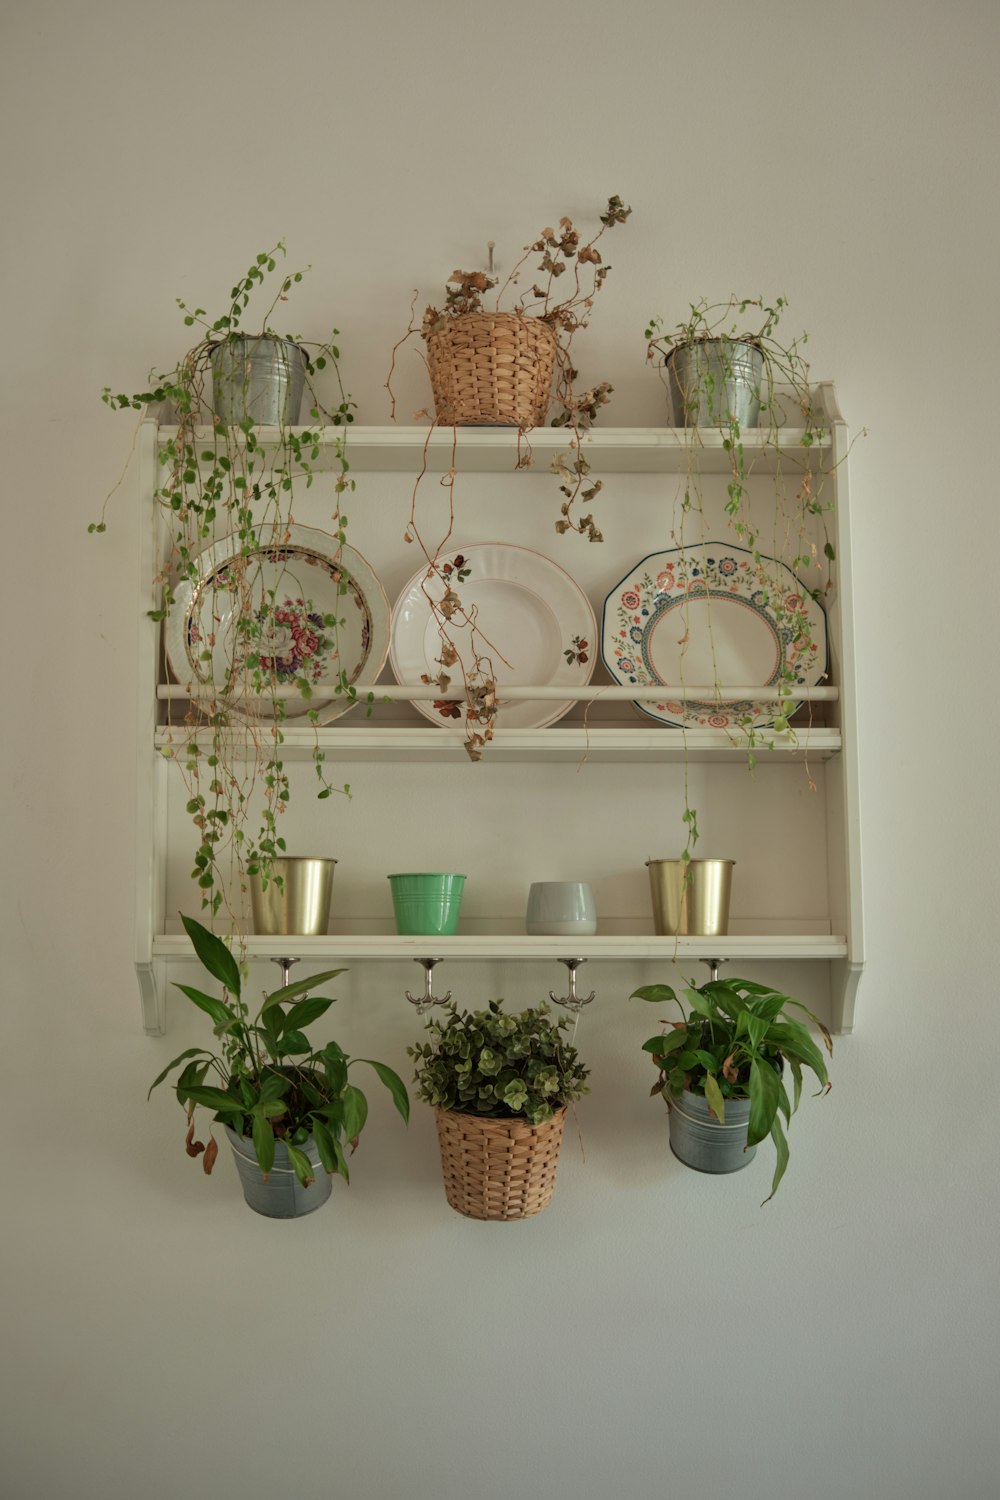 a shelf filled with potted plants and plates